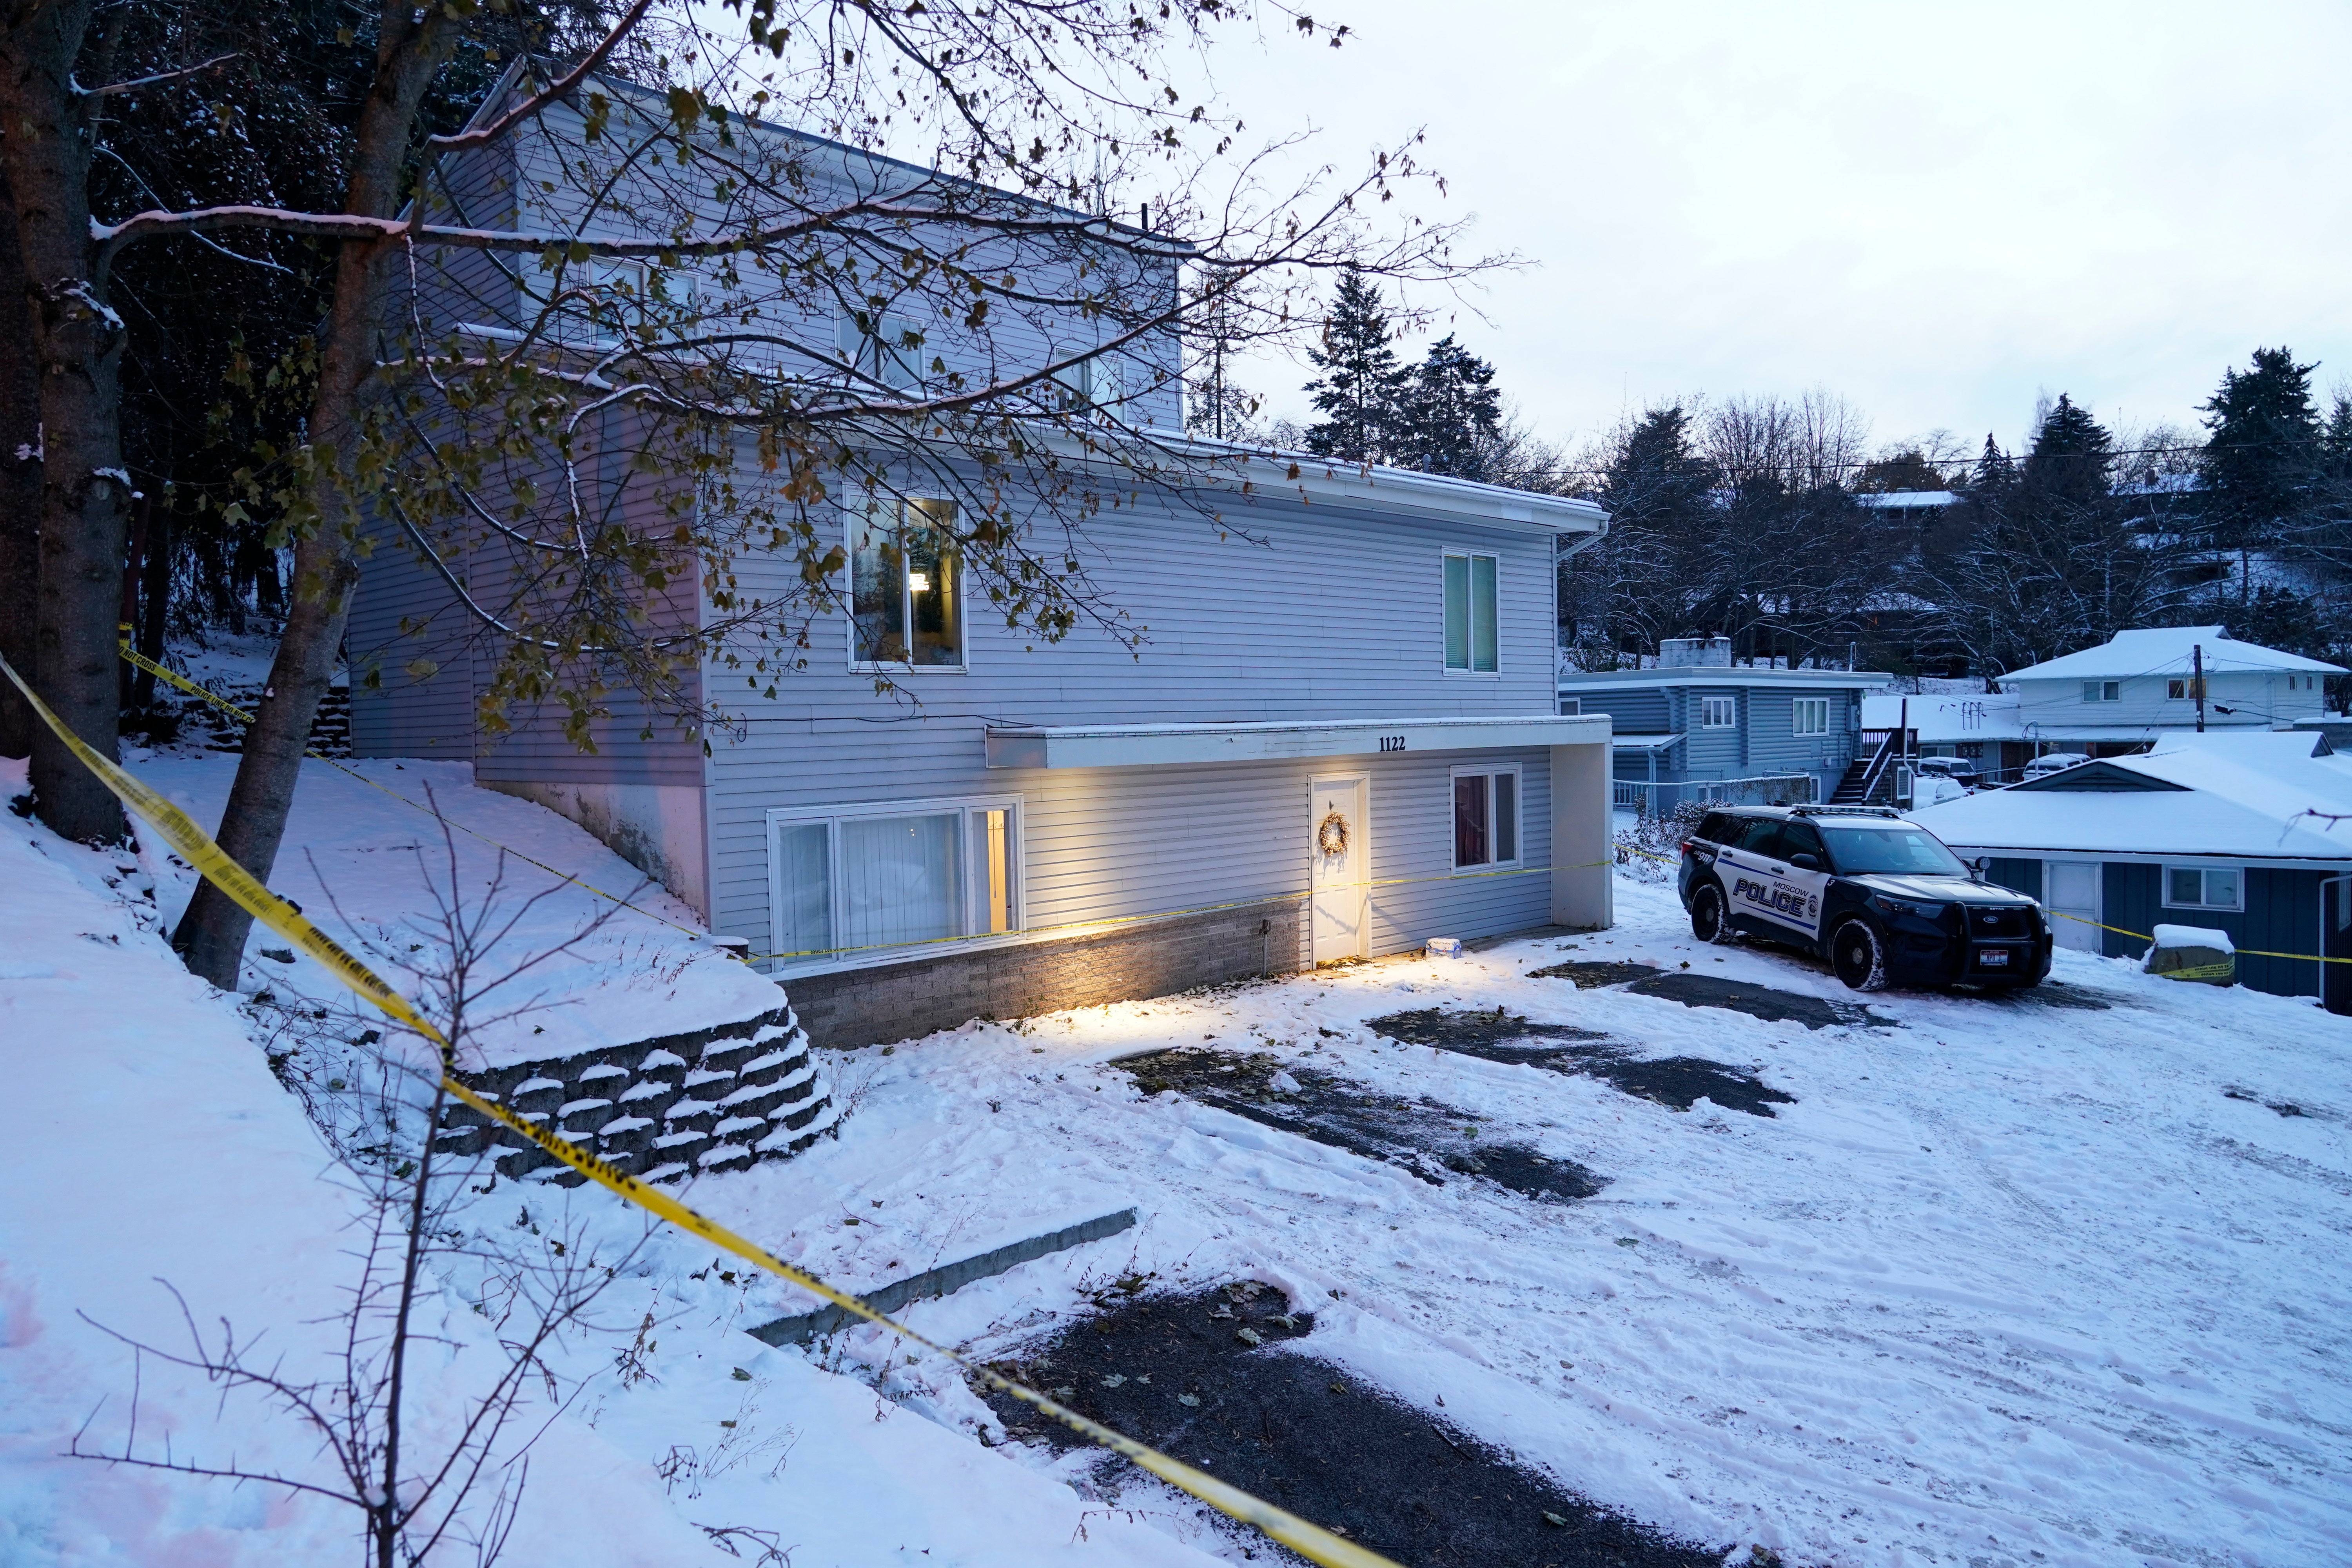 Snowy parking lot in front of the home where four University of Idaho students were found dead on Nov. 13, in Moscow, Idaho